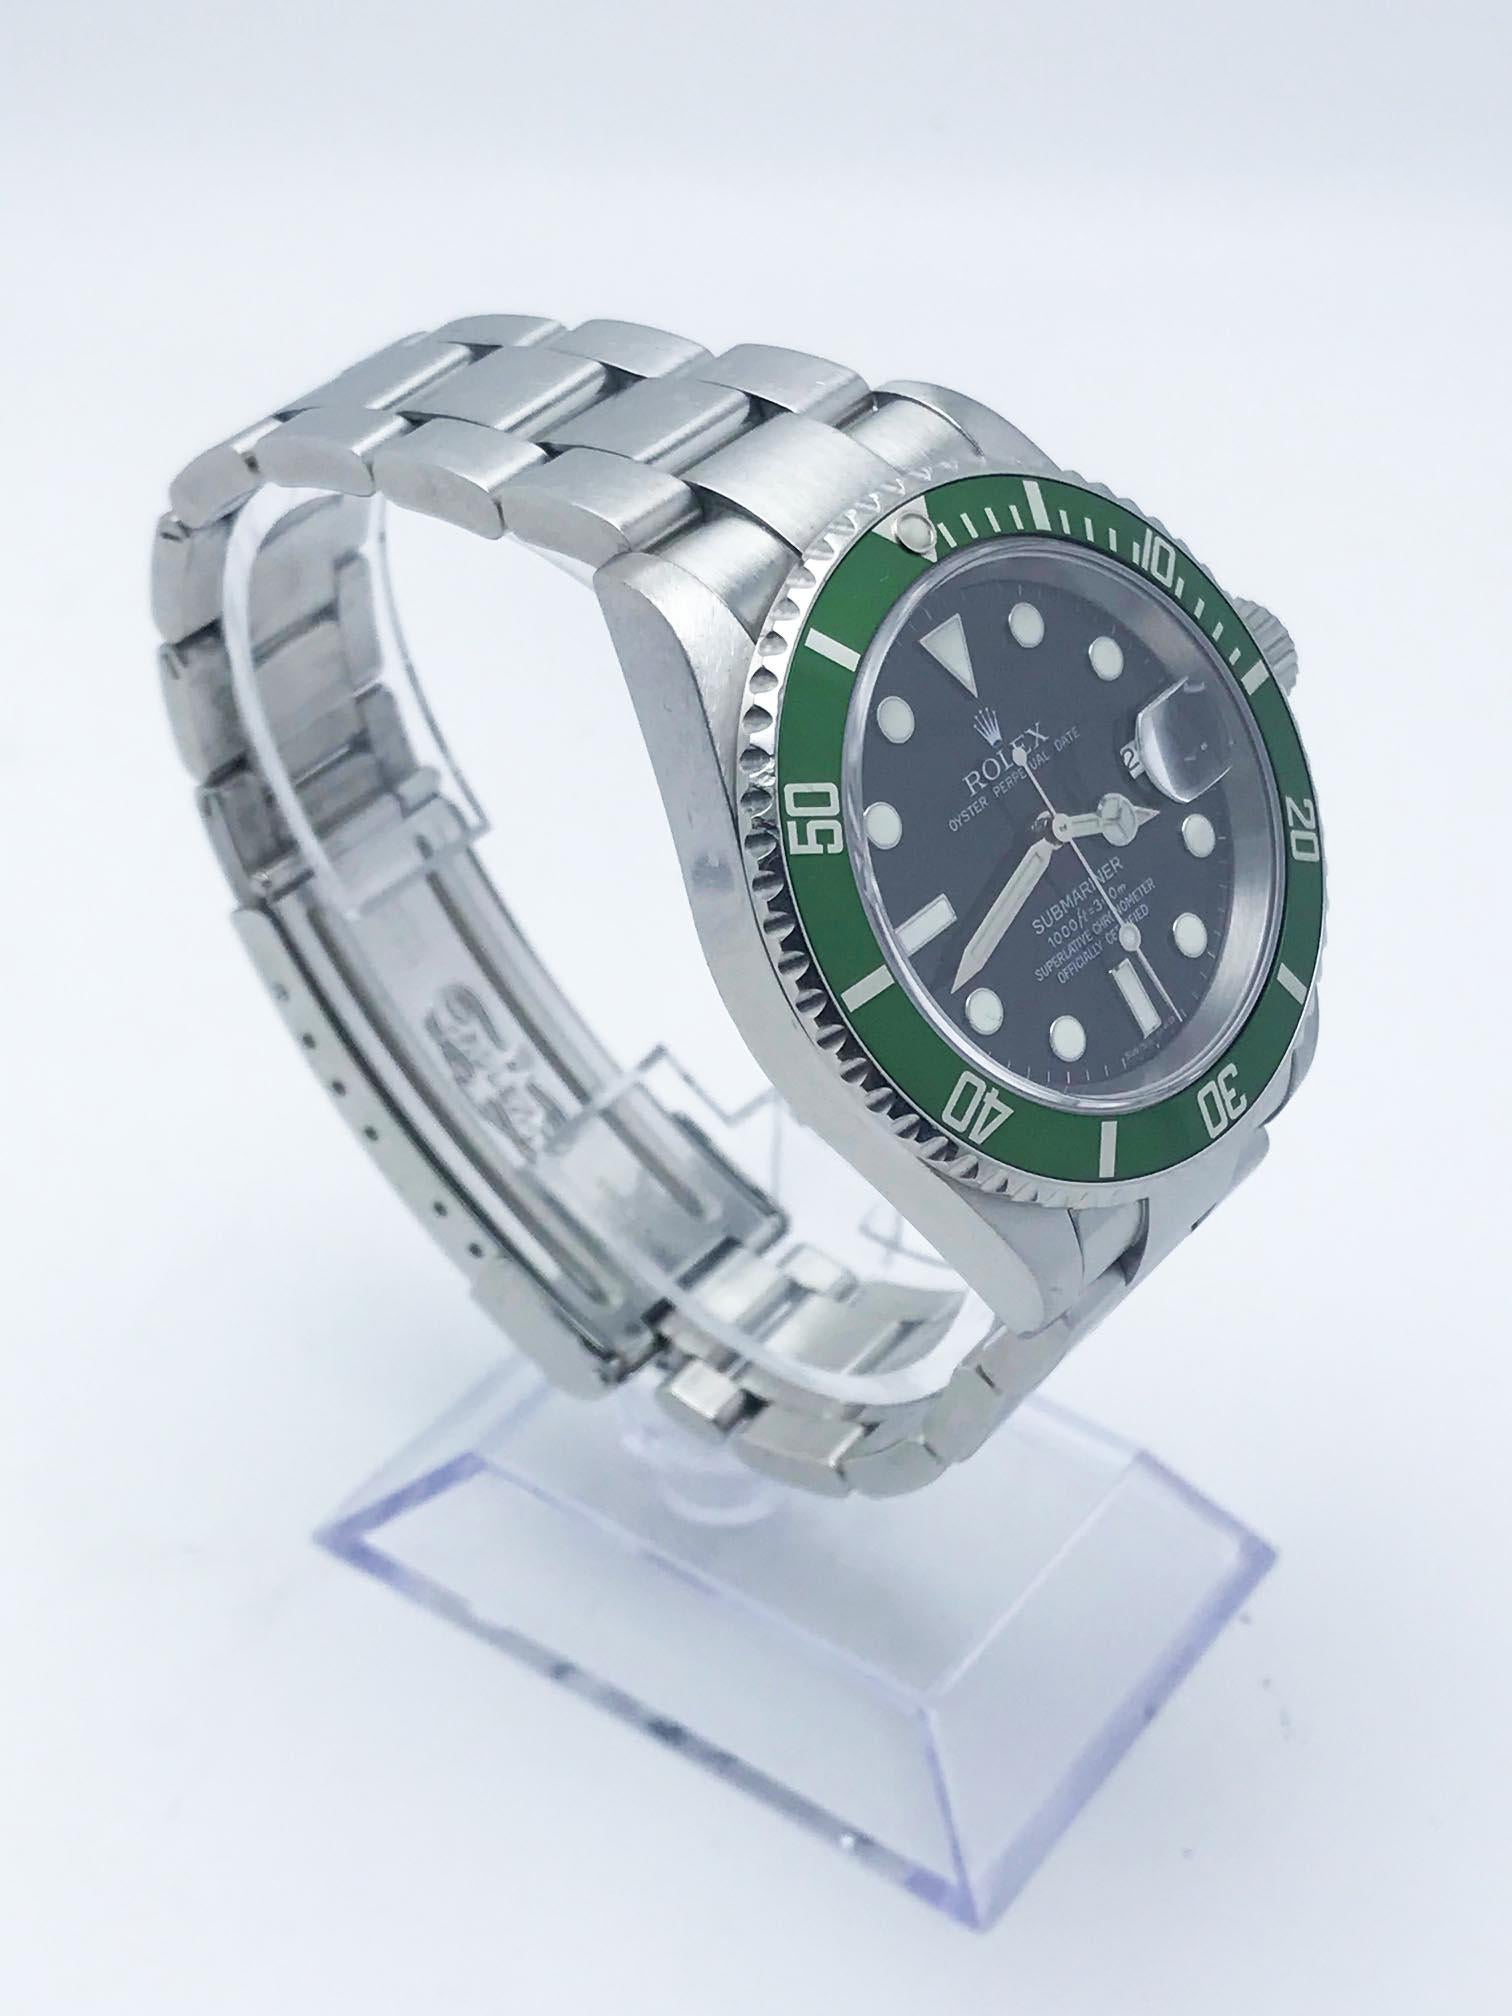 Style Number: 16610

 

Serial: Z607***



Year: 2006

 

Model: Submariner 

 

Case Material: Stainless Steel

 

Band: Stainless Steel

 

Bezel:  Green 

 

Dial: Black

 

Face: Sapphire Crystal

 

Case Size: 40mm